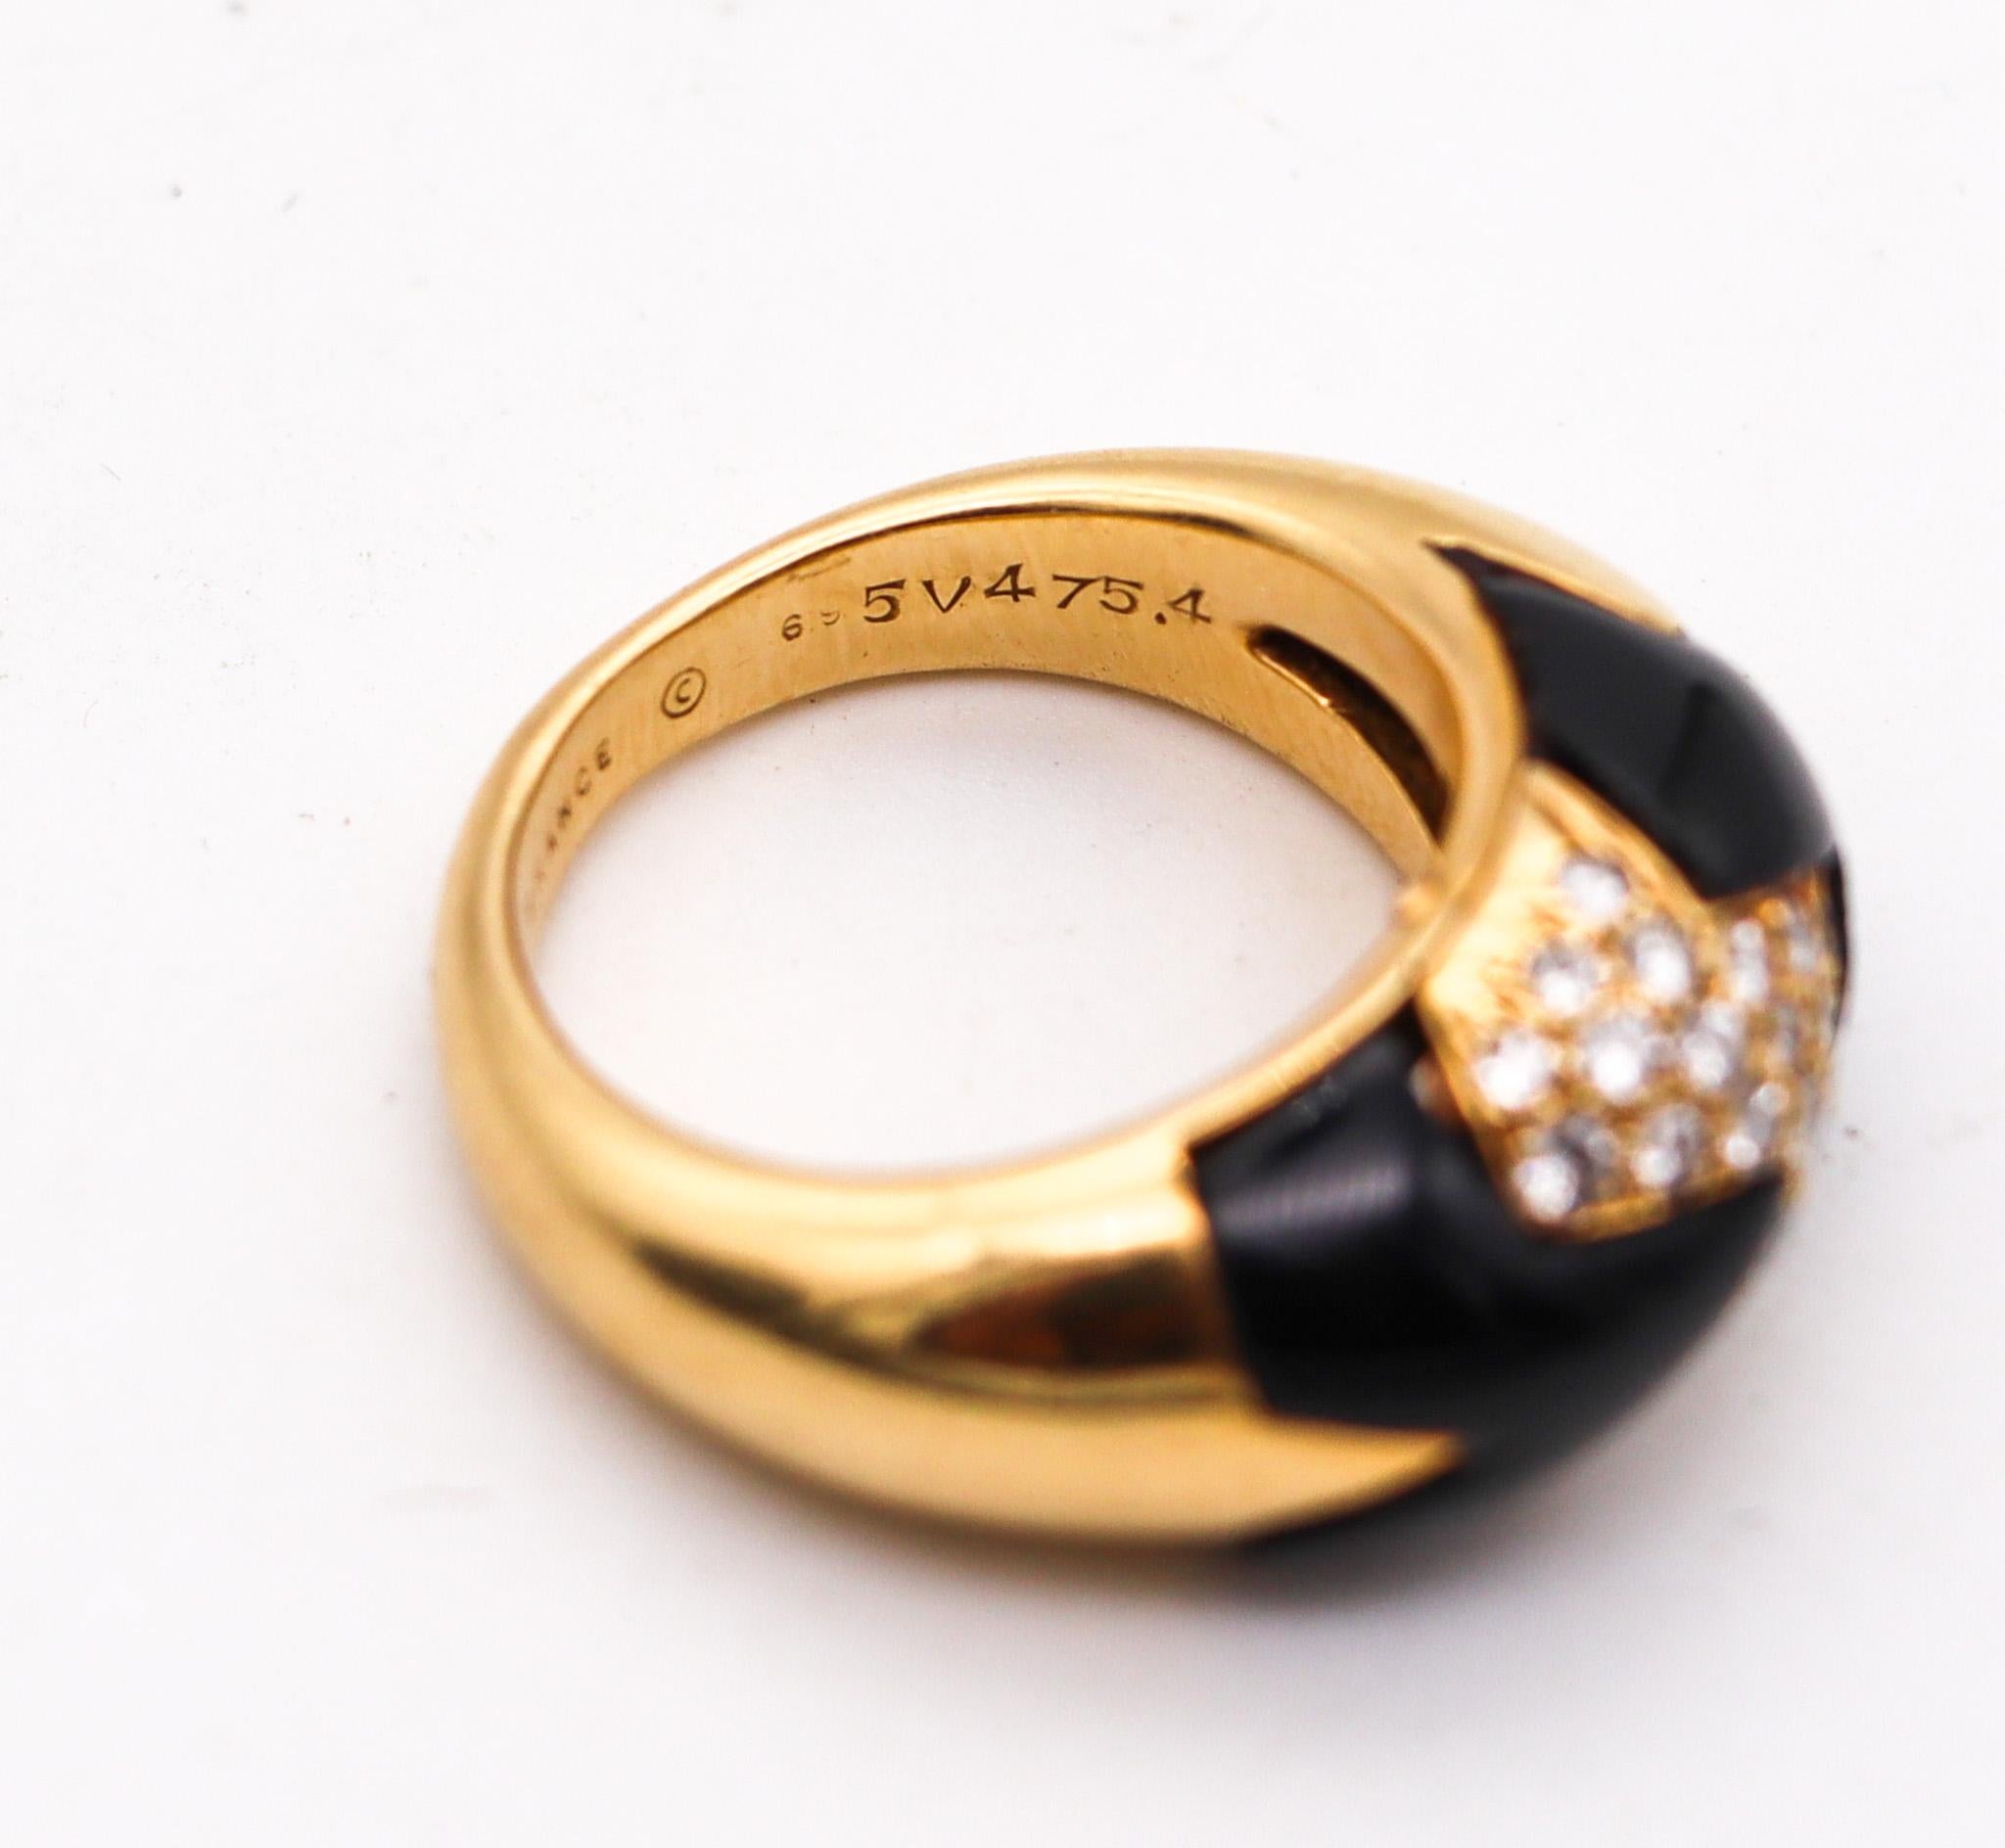 Brilliant Cut Van Cleef & Arpels 1970 Geometric Ring In 18Kt Gold With Diamonds And Black Onyx For Sale